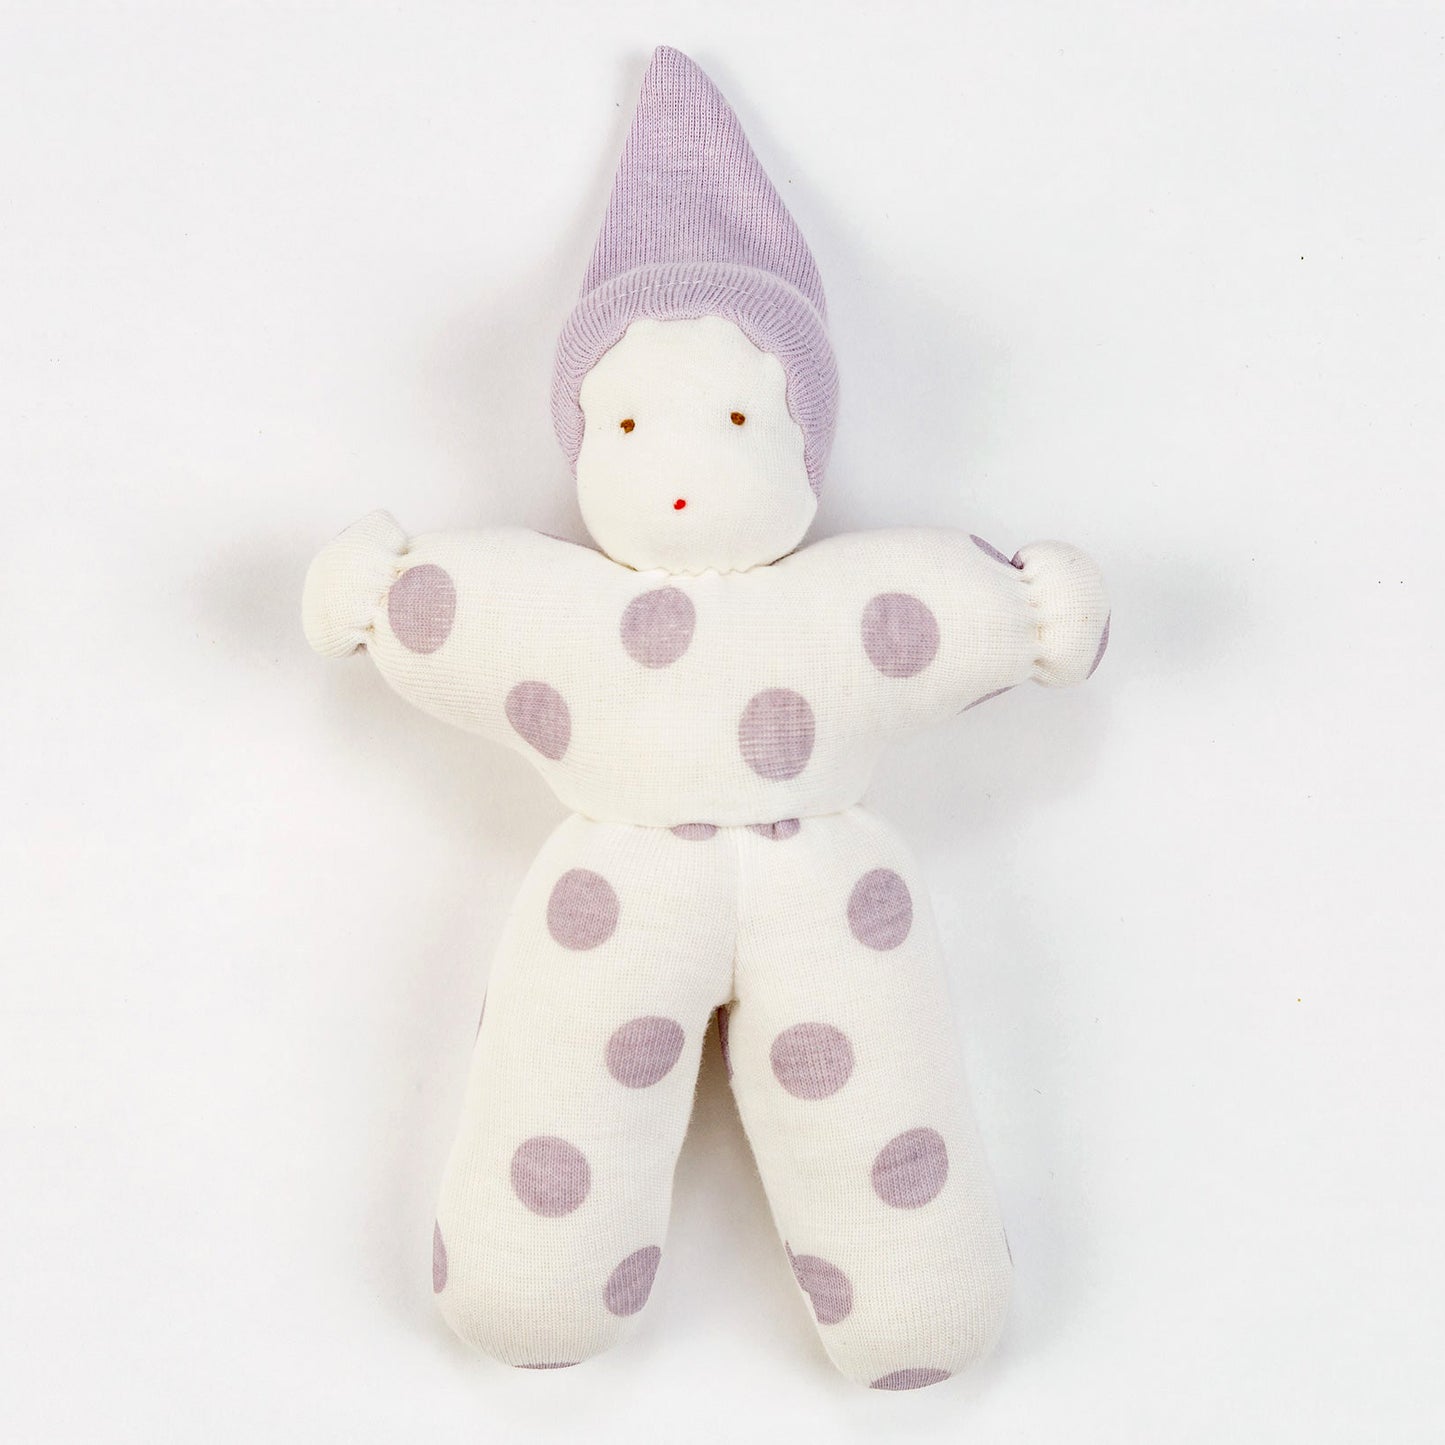 Under the Nile Organic Cotton Baby's First Waldorf Doll - Lavender Dot